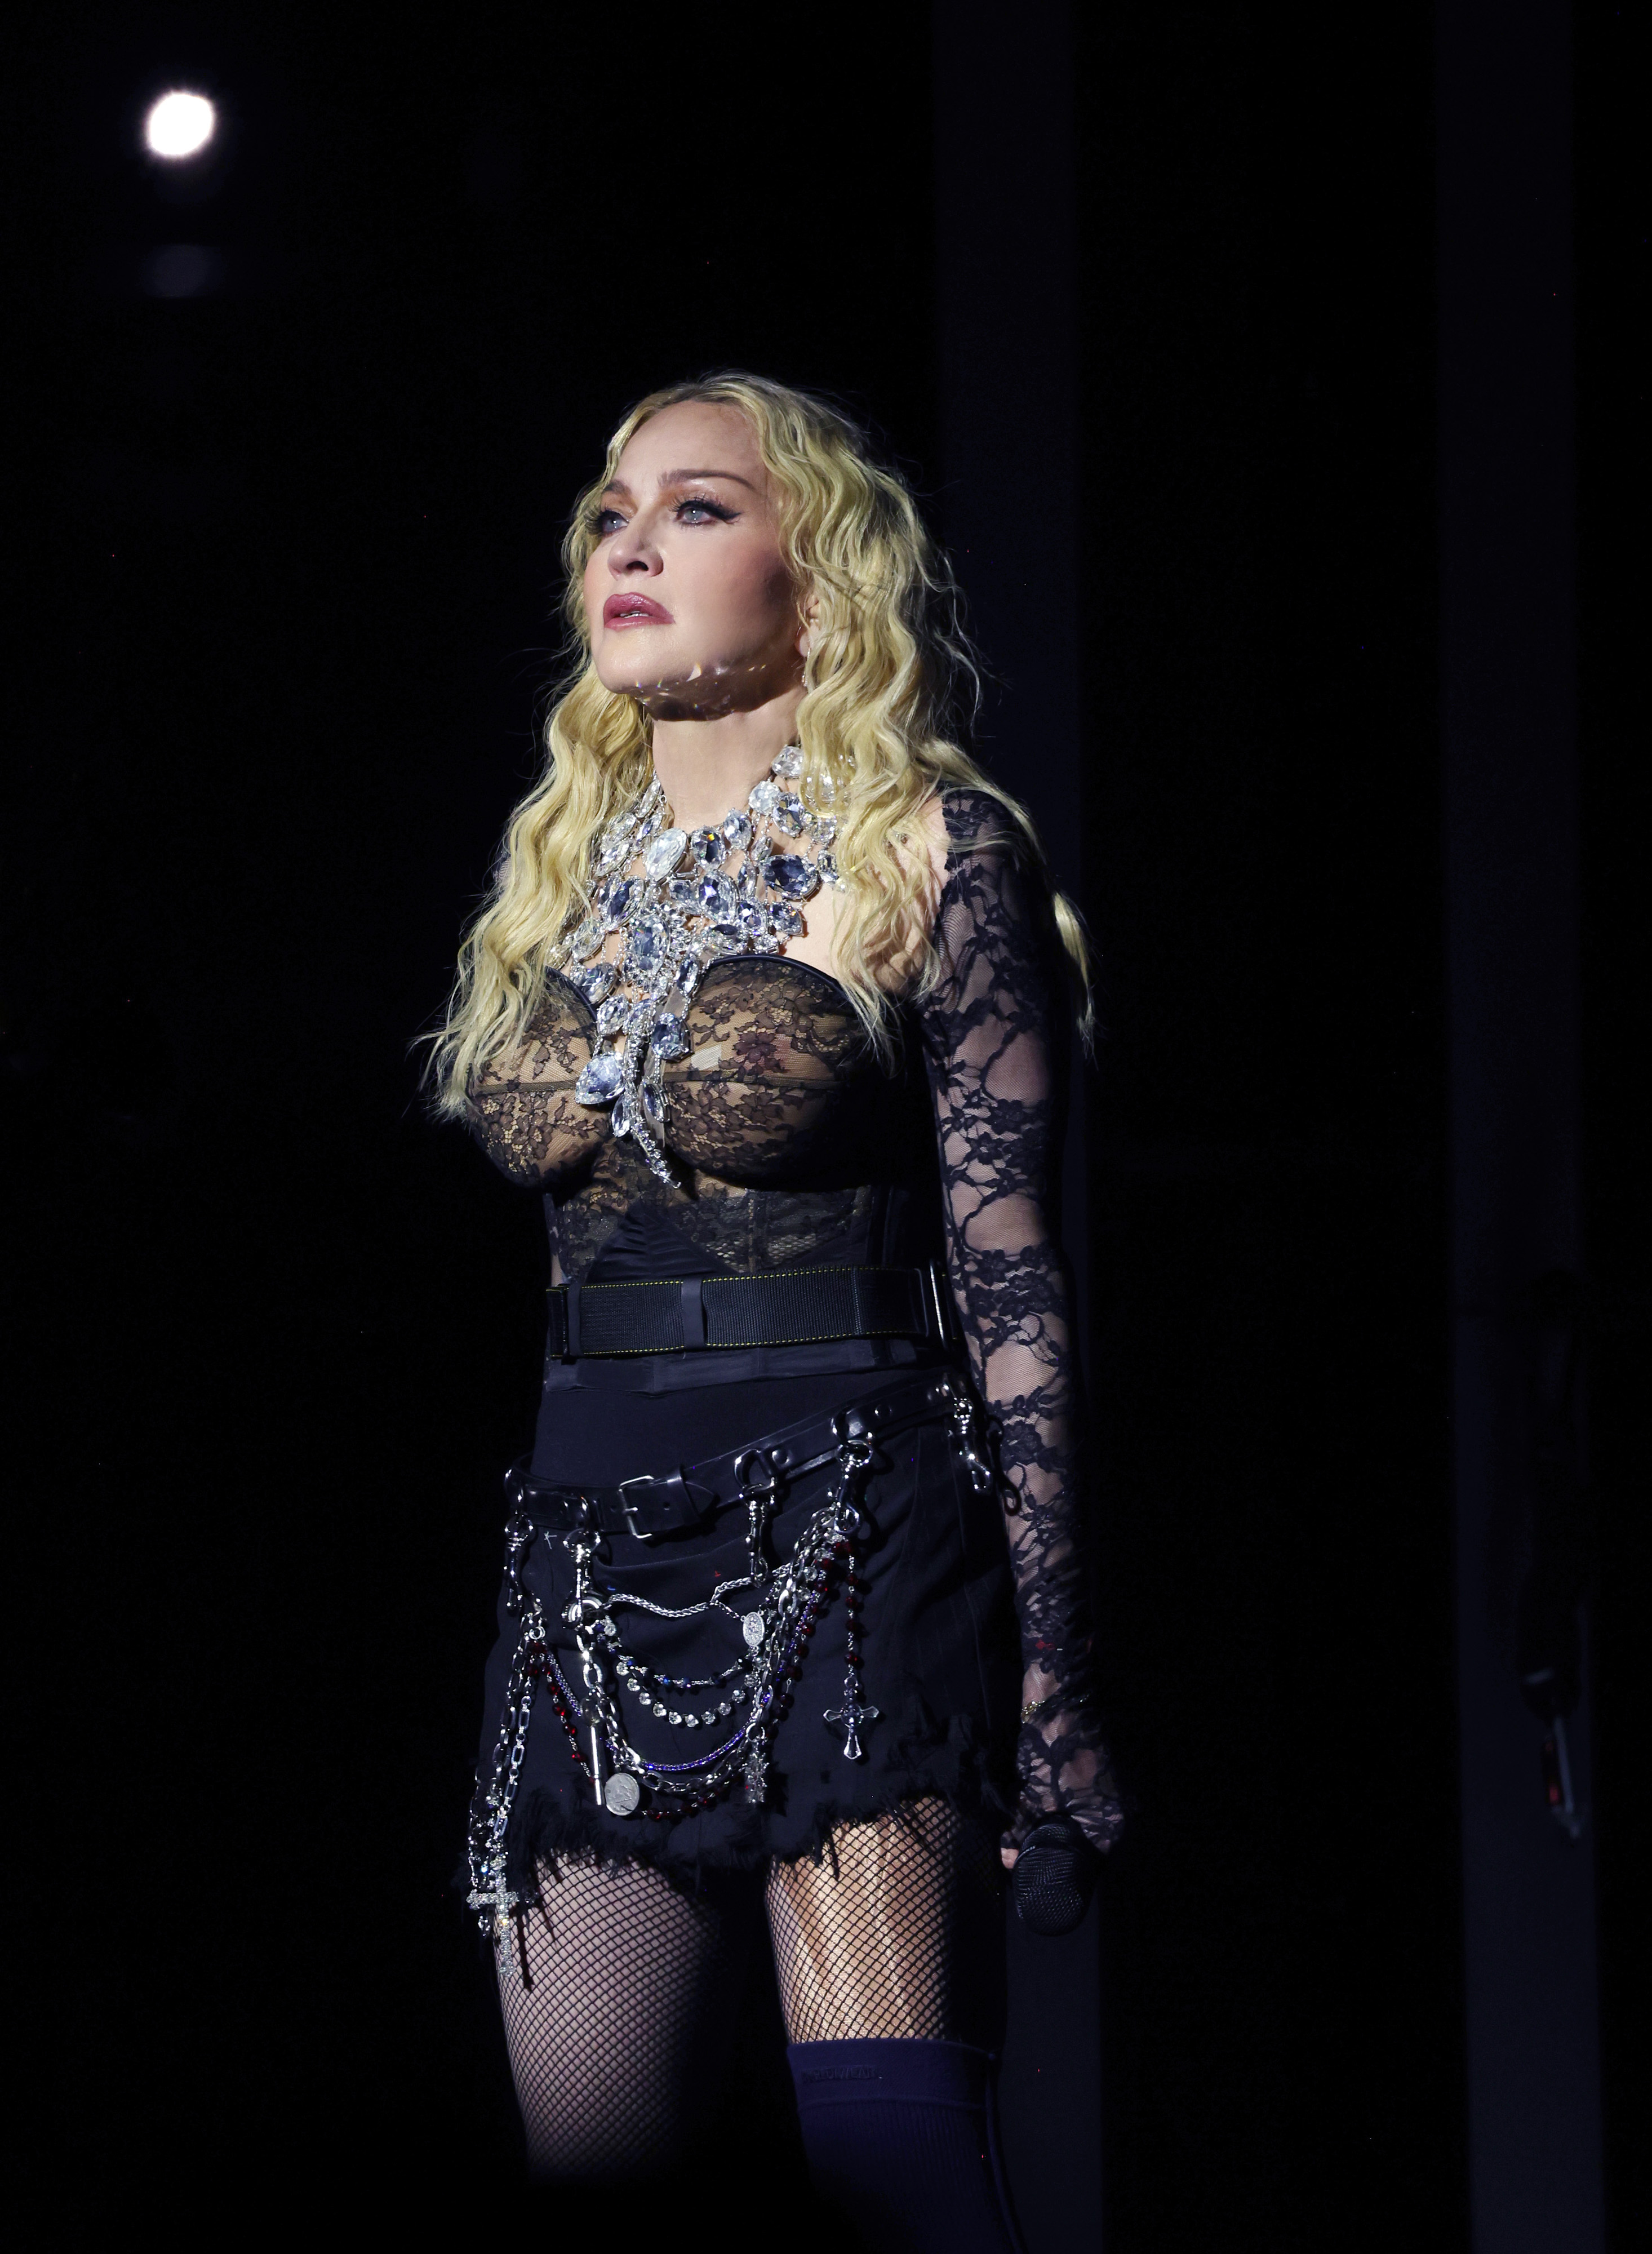 Madonna announced she will end her international tour in Rio